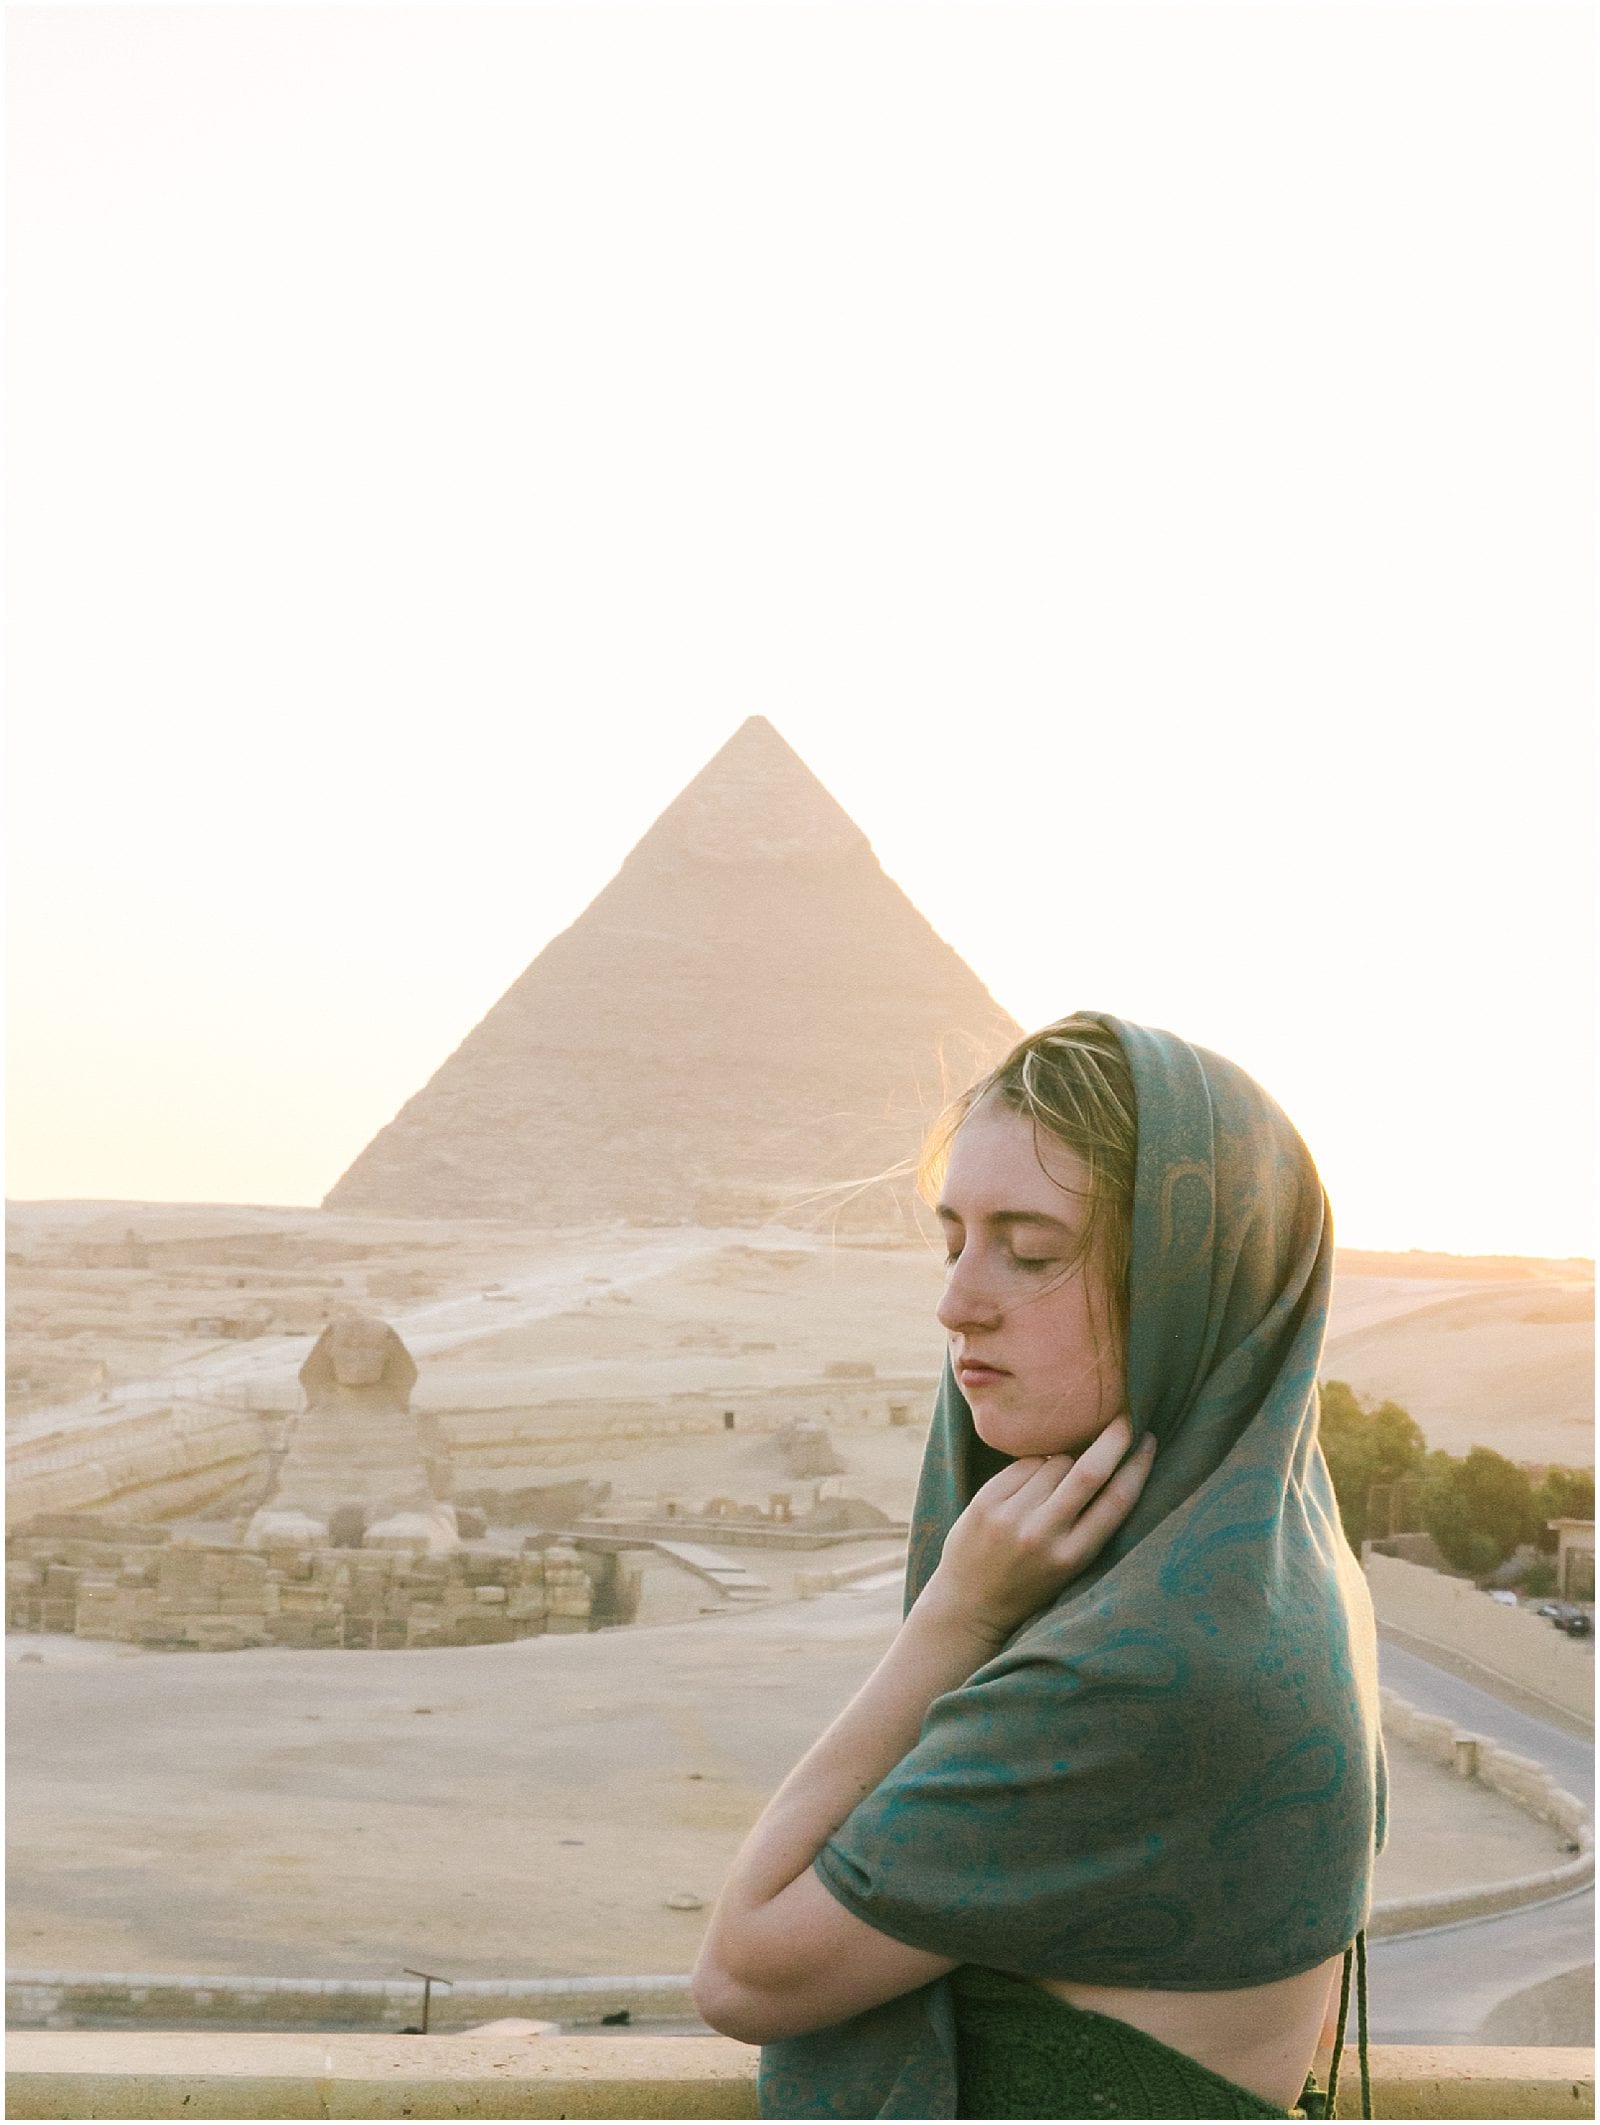 Woman in shawl at Pyramids of Giza in Cairo Egypt Sphinx